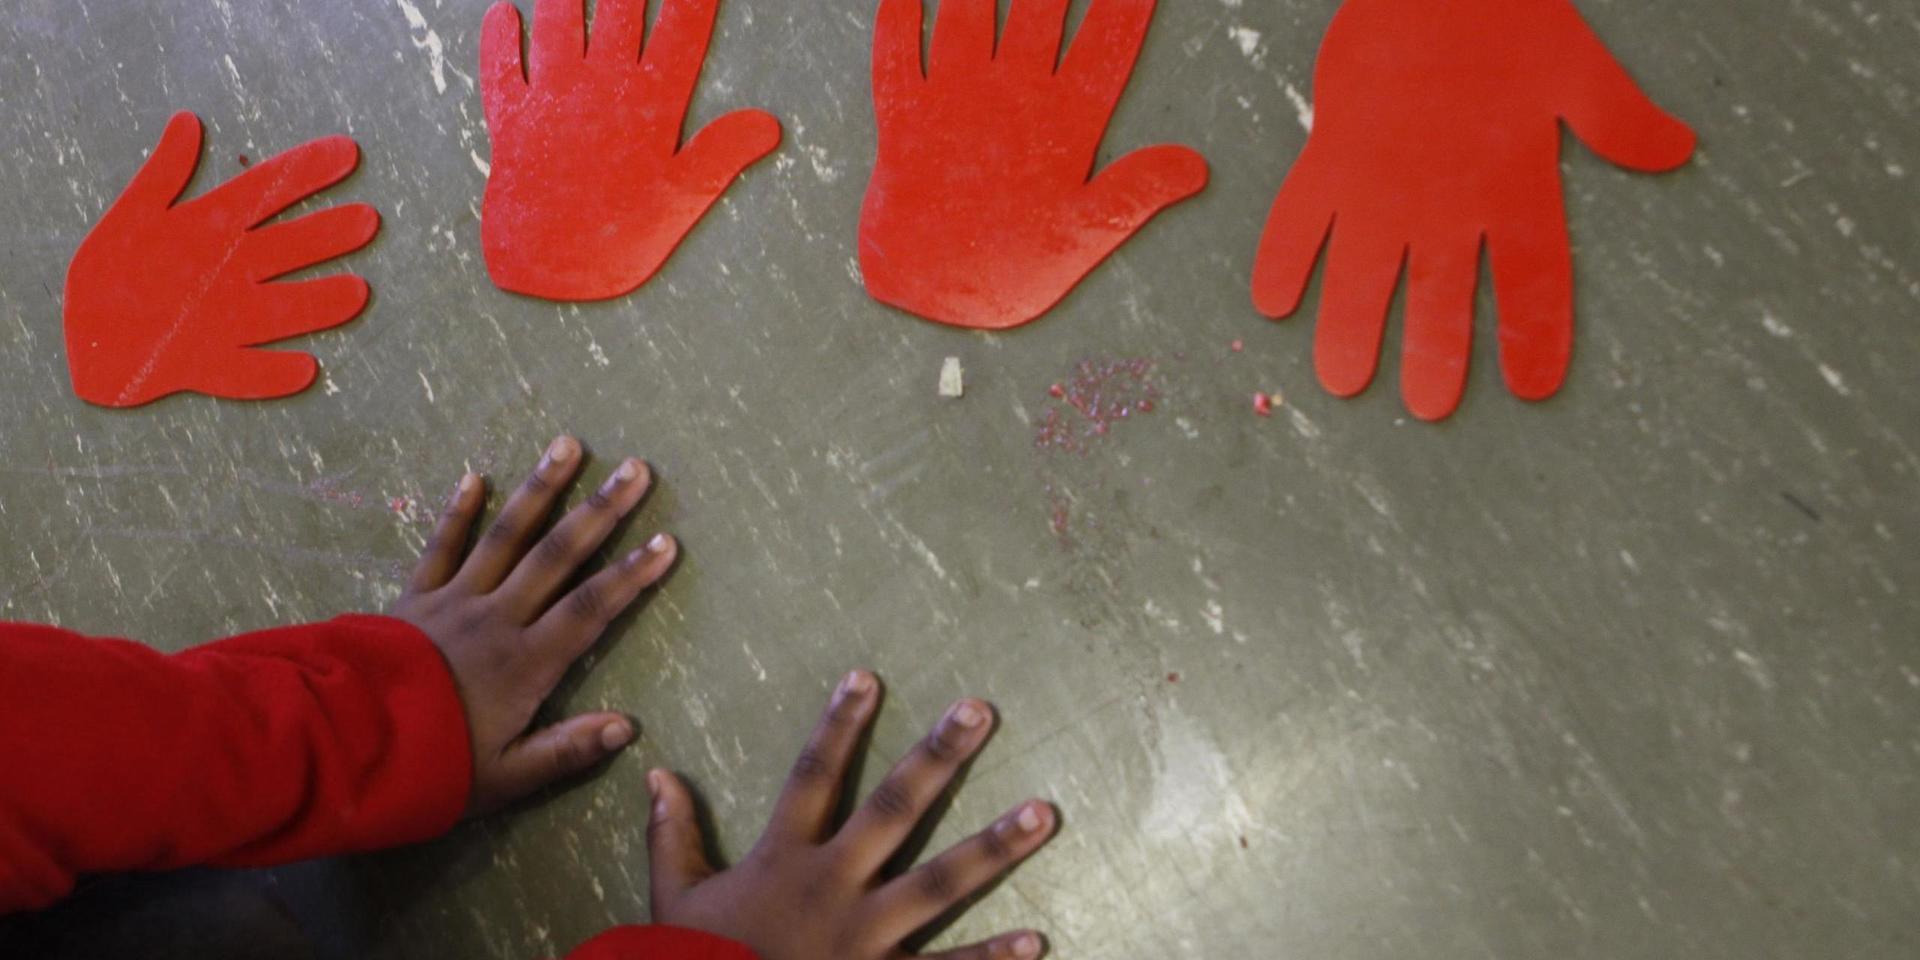 A child plays with hand imprints on the floor at a toy library and play center run by Cotlands, a local non-profit organization that promotes early learning opportunities for children, on World Play Day in  Johannesburg, Tuesday, May 28, 2013. Cotlands first opened it's doors 77 years ago offering adoption services for abandoned babies. In 1996 it opened an HIV hospice to address the increased HIV birth rate which claimed 98 children in 2002. In the past three years no child has died leading to the closure of the HIV hospice and now prioritizes it's efforts into advocation for an improvement in early childhood education. (AP Photo/Denis Farrell)